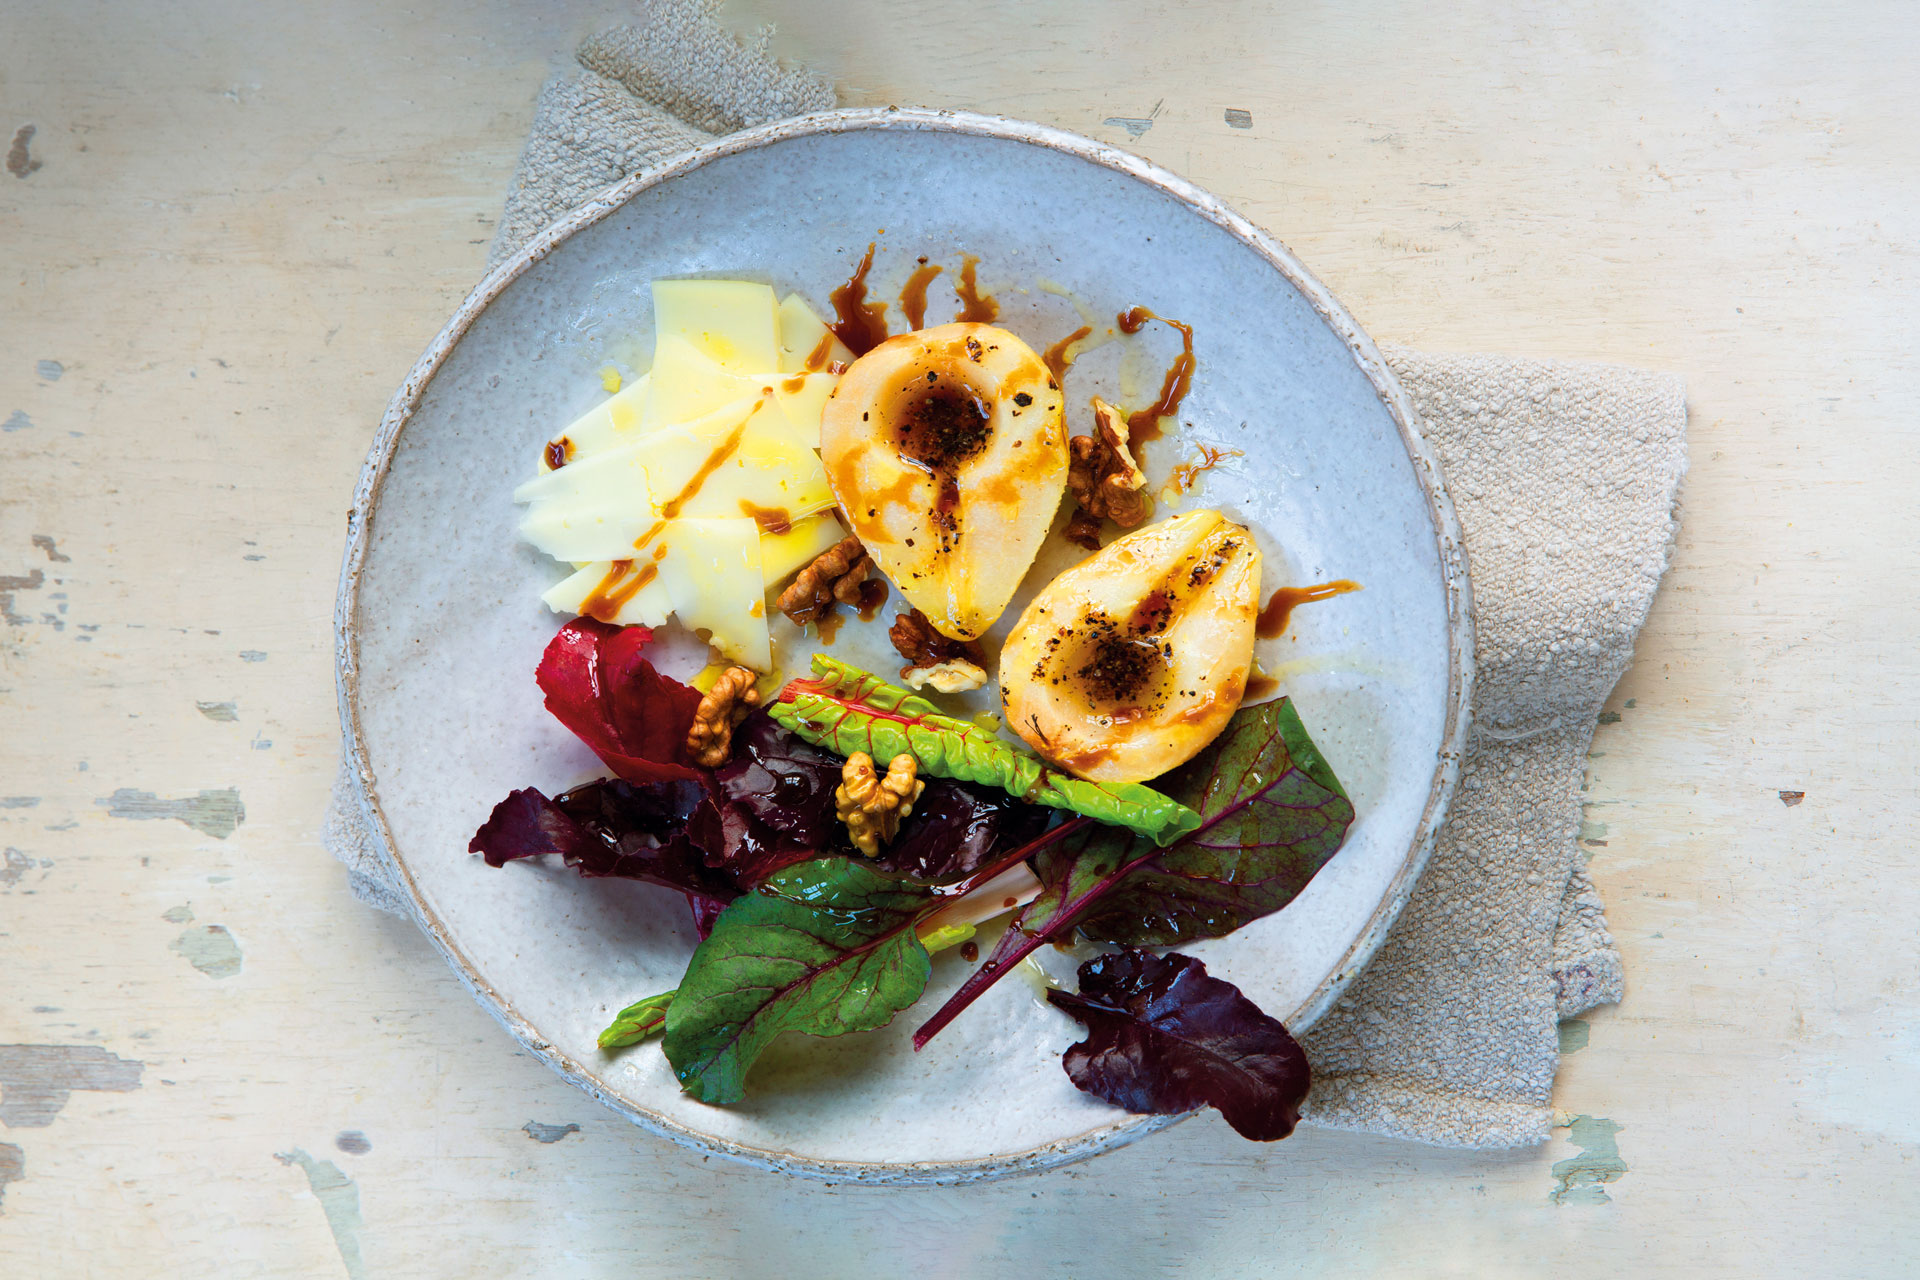 Recipe: Roasted Peppered Pear Salad with Sheep’s Cheese, Honey and Walnuts